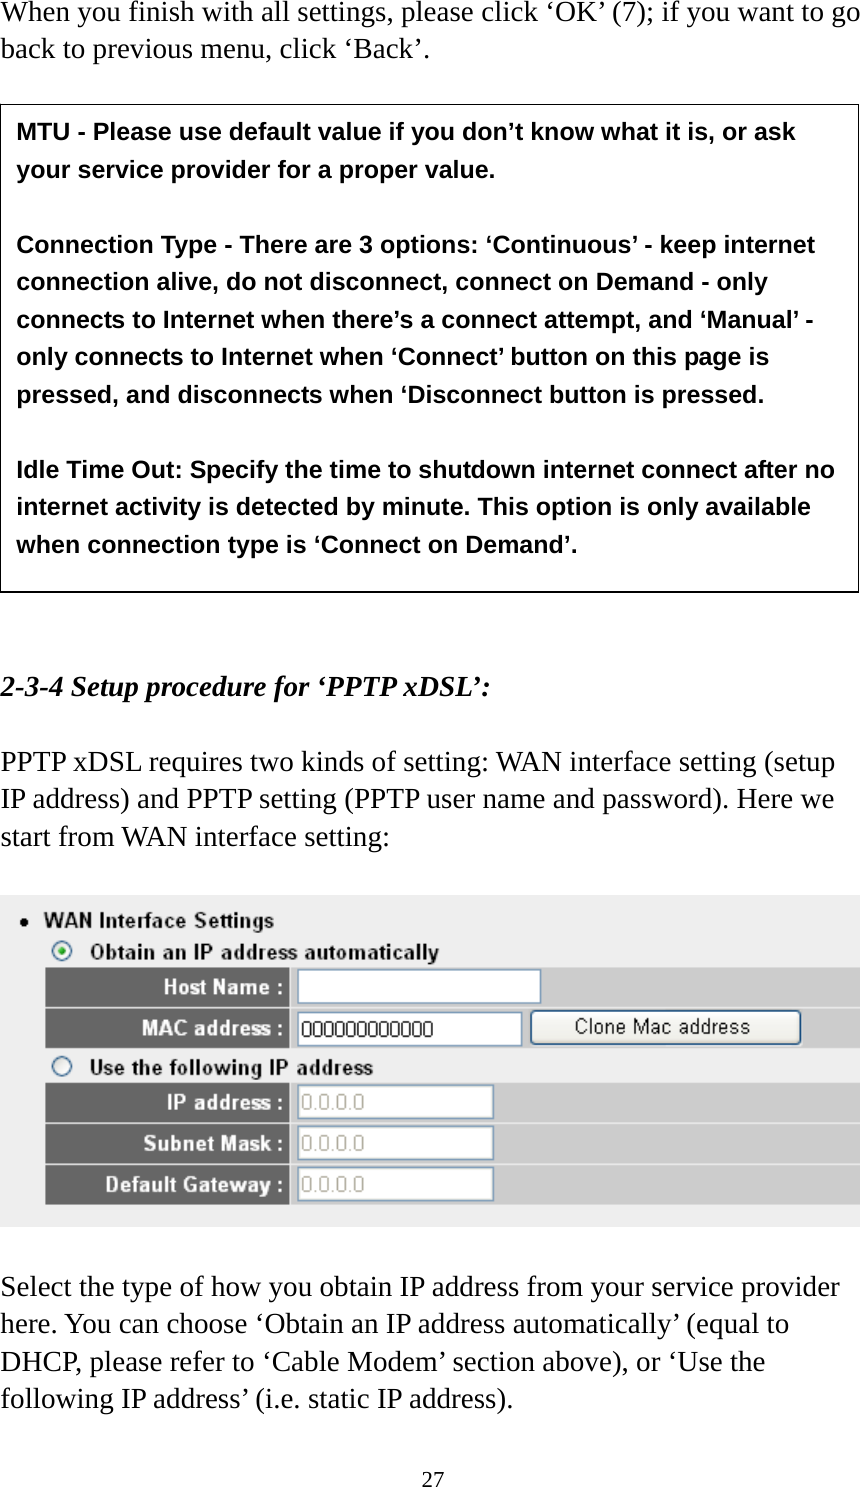 27 When you finish with all settings, please click ‘OK’ (7); if you want to go back to previous menu, click ‘Back’.                  2-3-4 Setup procedure for ‘PPTP xDSL’:  PPTP xDSL requires two kinds of setting: WAN interface setting (setup IP address) and PPTP setting (PPTP user name and password). Here we start from WAN interface setting:    Select the type of how you obtain IP address from your service provider here. You can choose ‘Obtain an IP address automatically’ (equal to DHCP, please refer to ‘Cable Modem’ section above), or ‘Use the following IP address’ (i.e. static IP address).   MTU - Please use default value if you don’t know what it is, or ask your service provider for a proper value.  Connection Type - There are 3 options: ‘Continuous’ - keep internet connection alive, do not disconnect, connect on Demand - only connects to Internet when there’s a connect attempt, and ‘Manual’ - only connects to Internet when ‘Connect’ button on this page is pressed, and disconnects when ‘Disconnect button is pressed.  Idle Time Out: Specify the time to shutdown internet connect after no internet activity is detected by minute. This option is only available when connection type is ‘Connect on Demand’. 